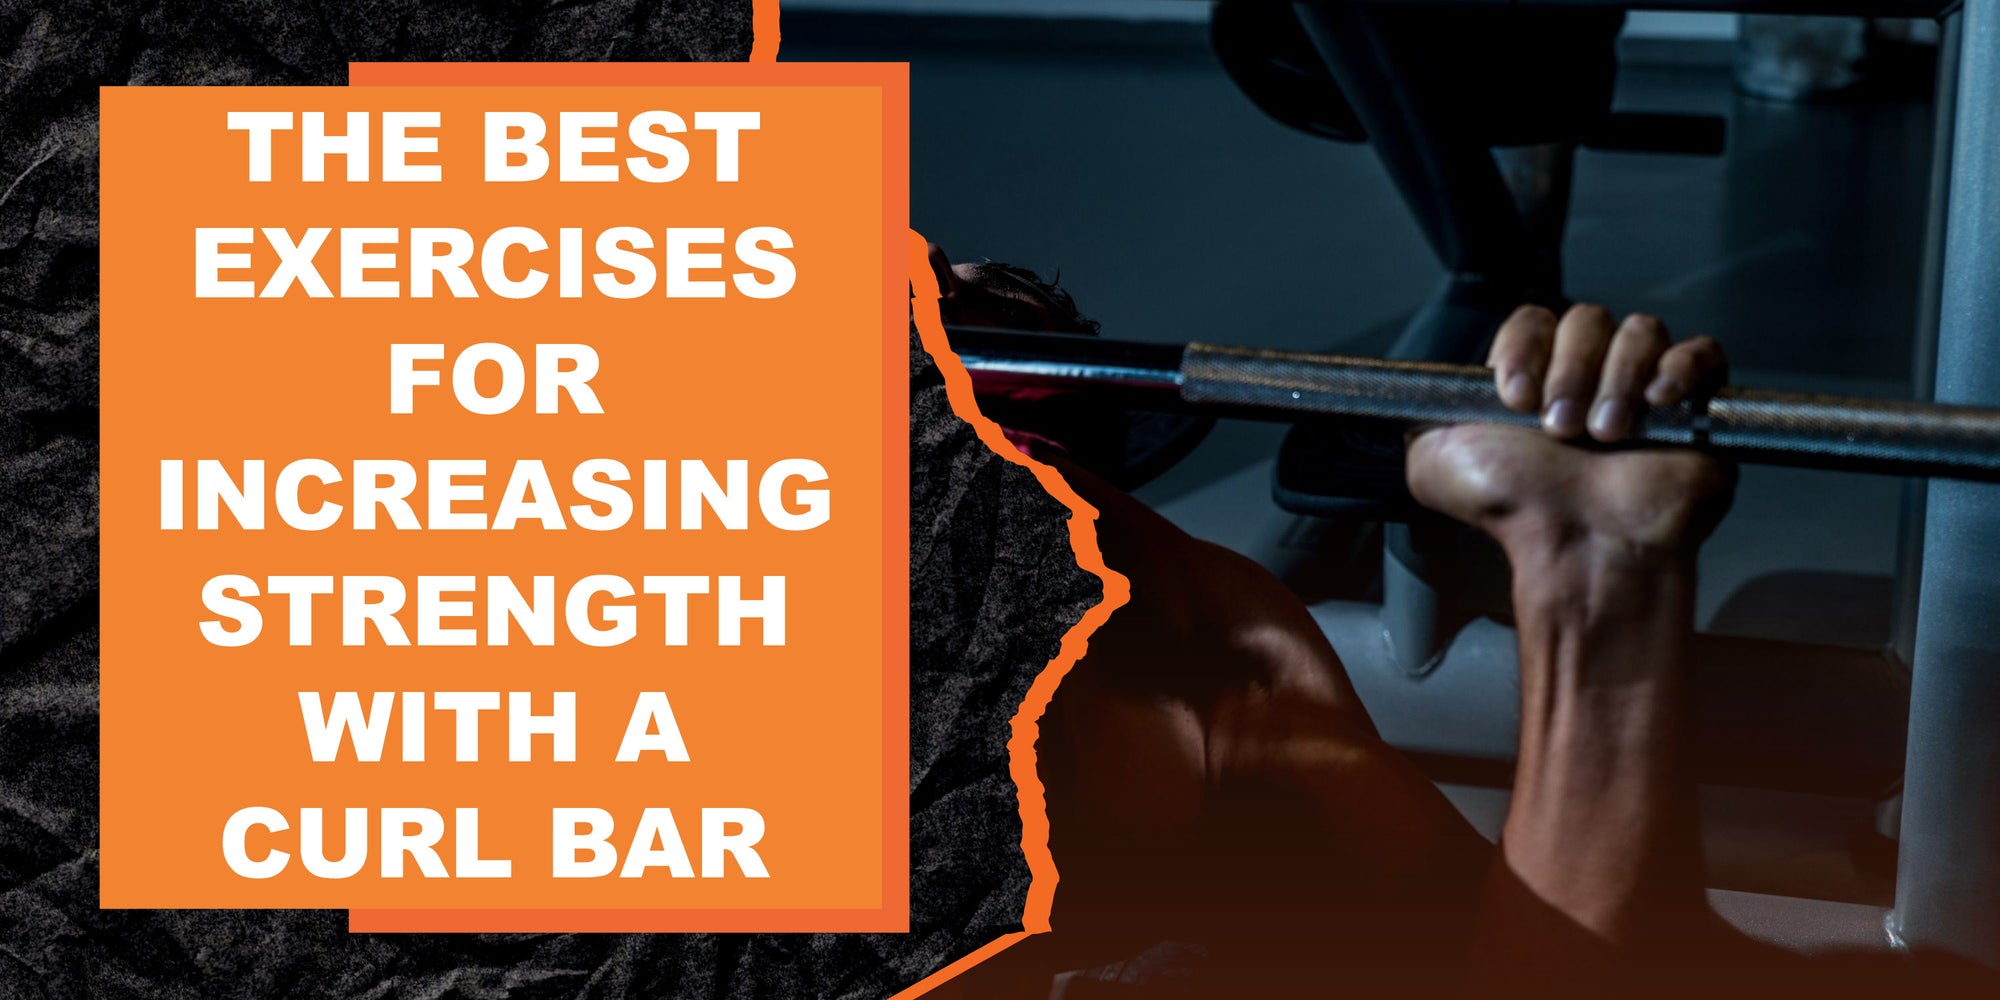 The Best Exercises for Increasing Strength with a Curl Bar